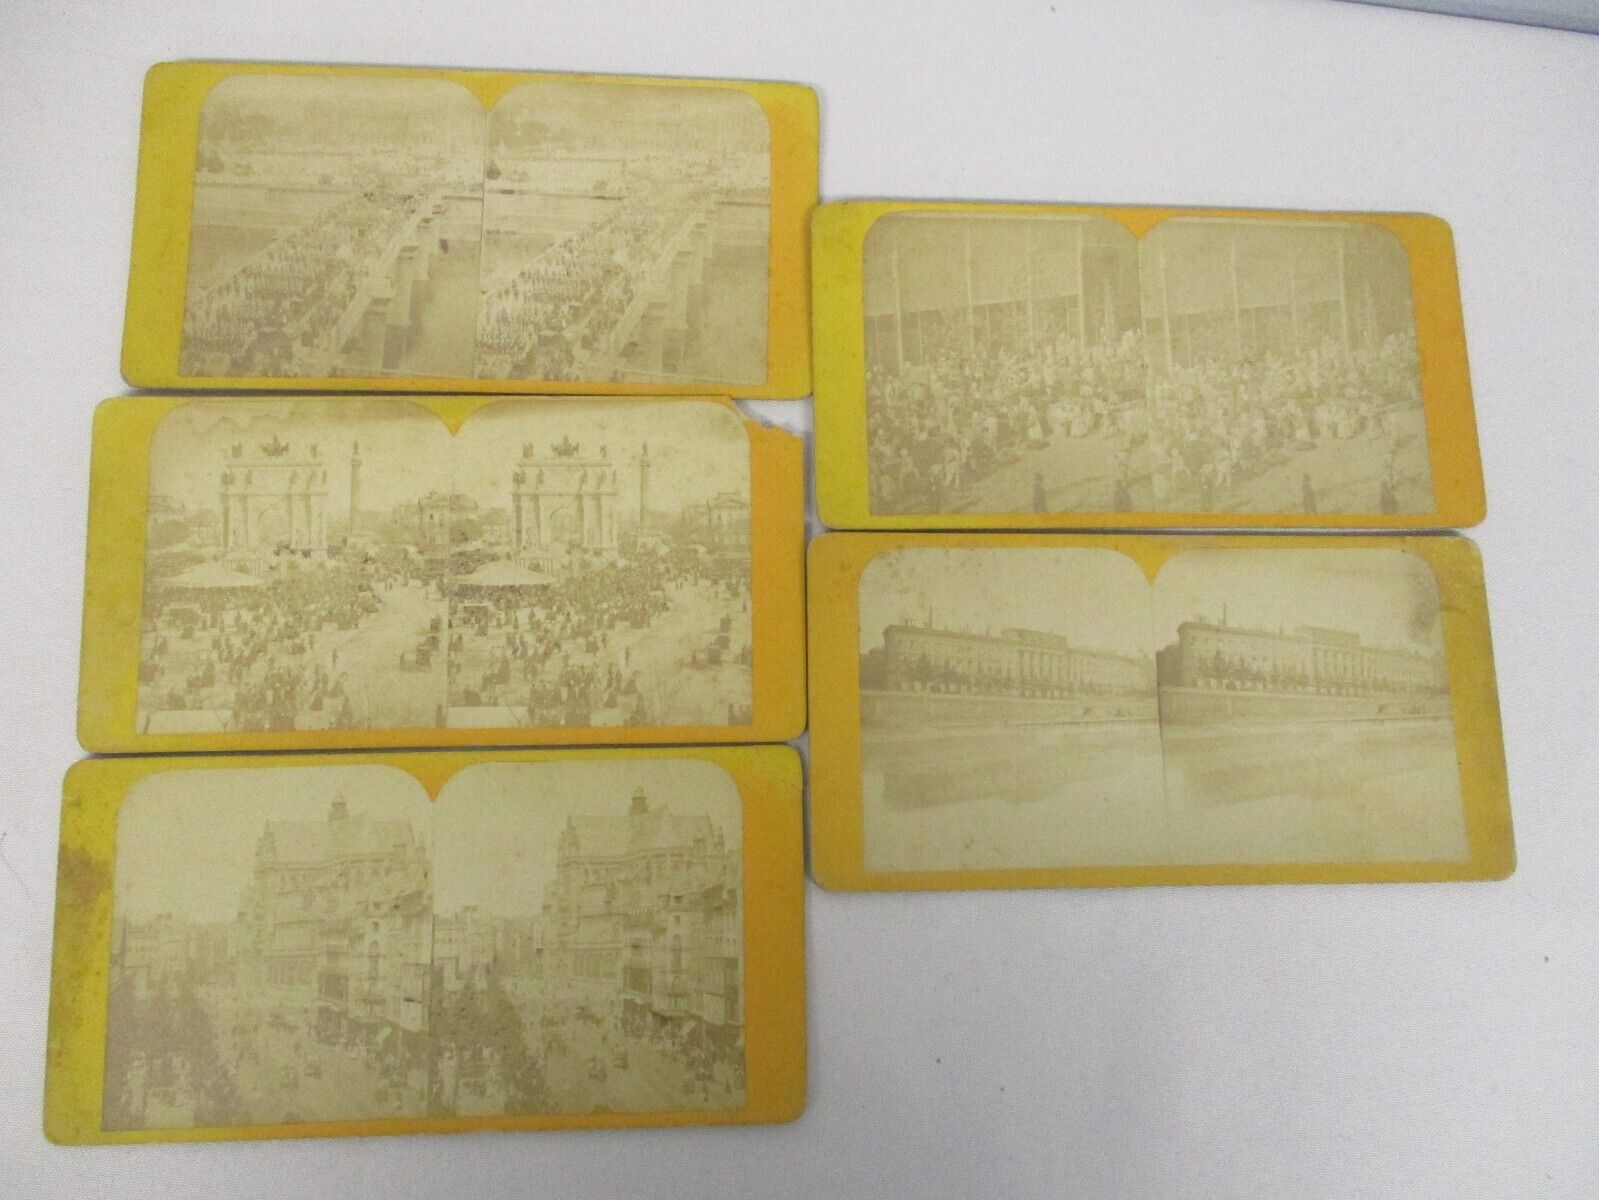 5 ANTIQUE STEREOVIEW CARDS with SCENES OF EUROPE ~ PARADE & STREET SCENES